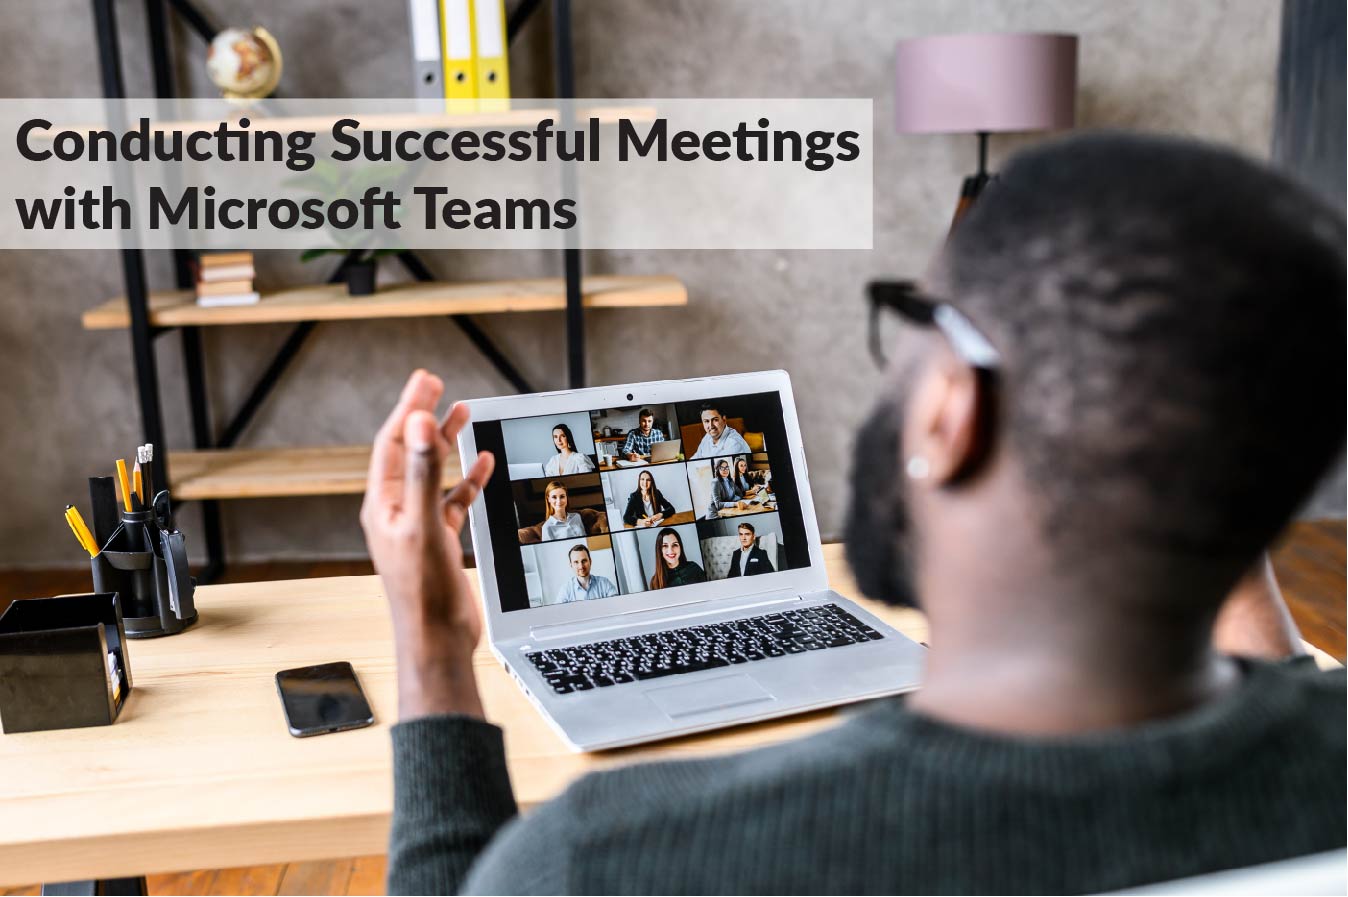 Conducting Successful Meetings with Microsoft Teams